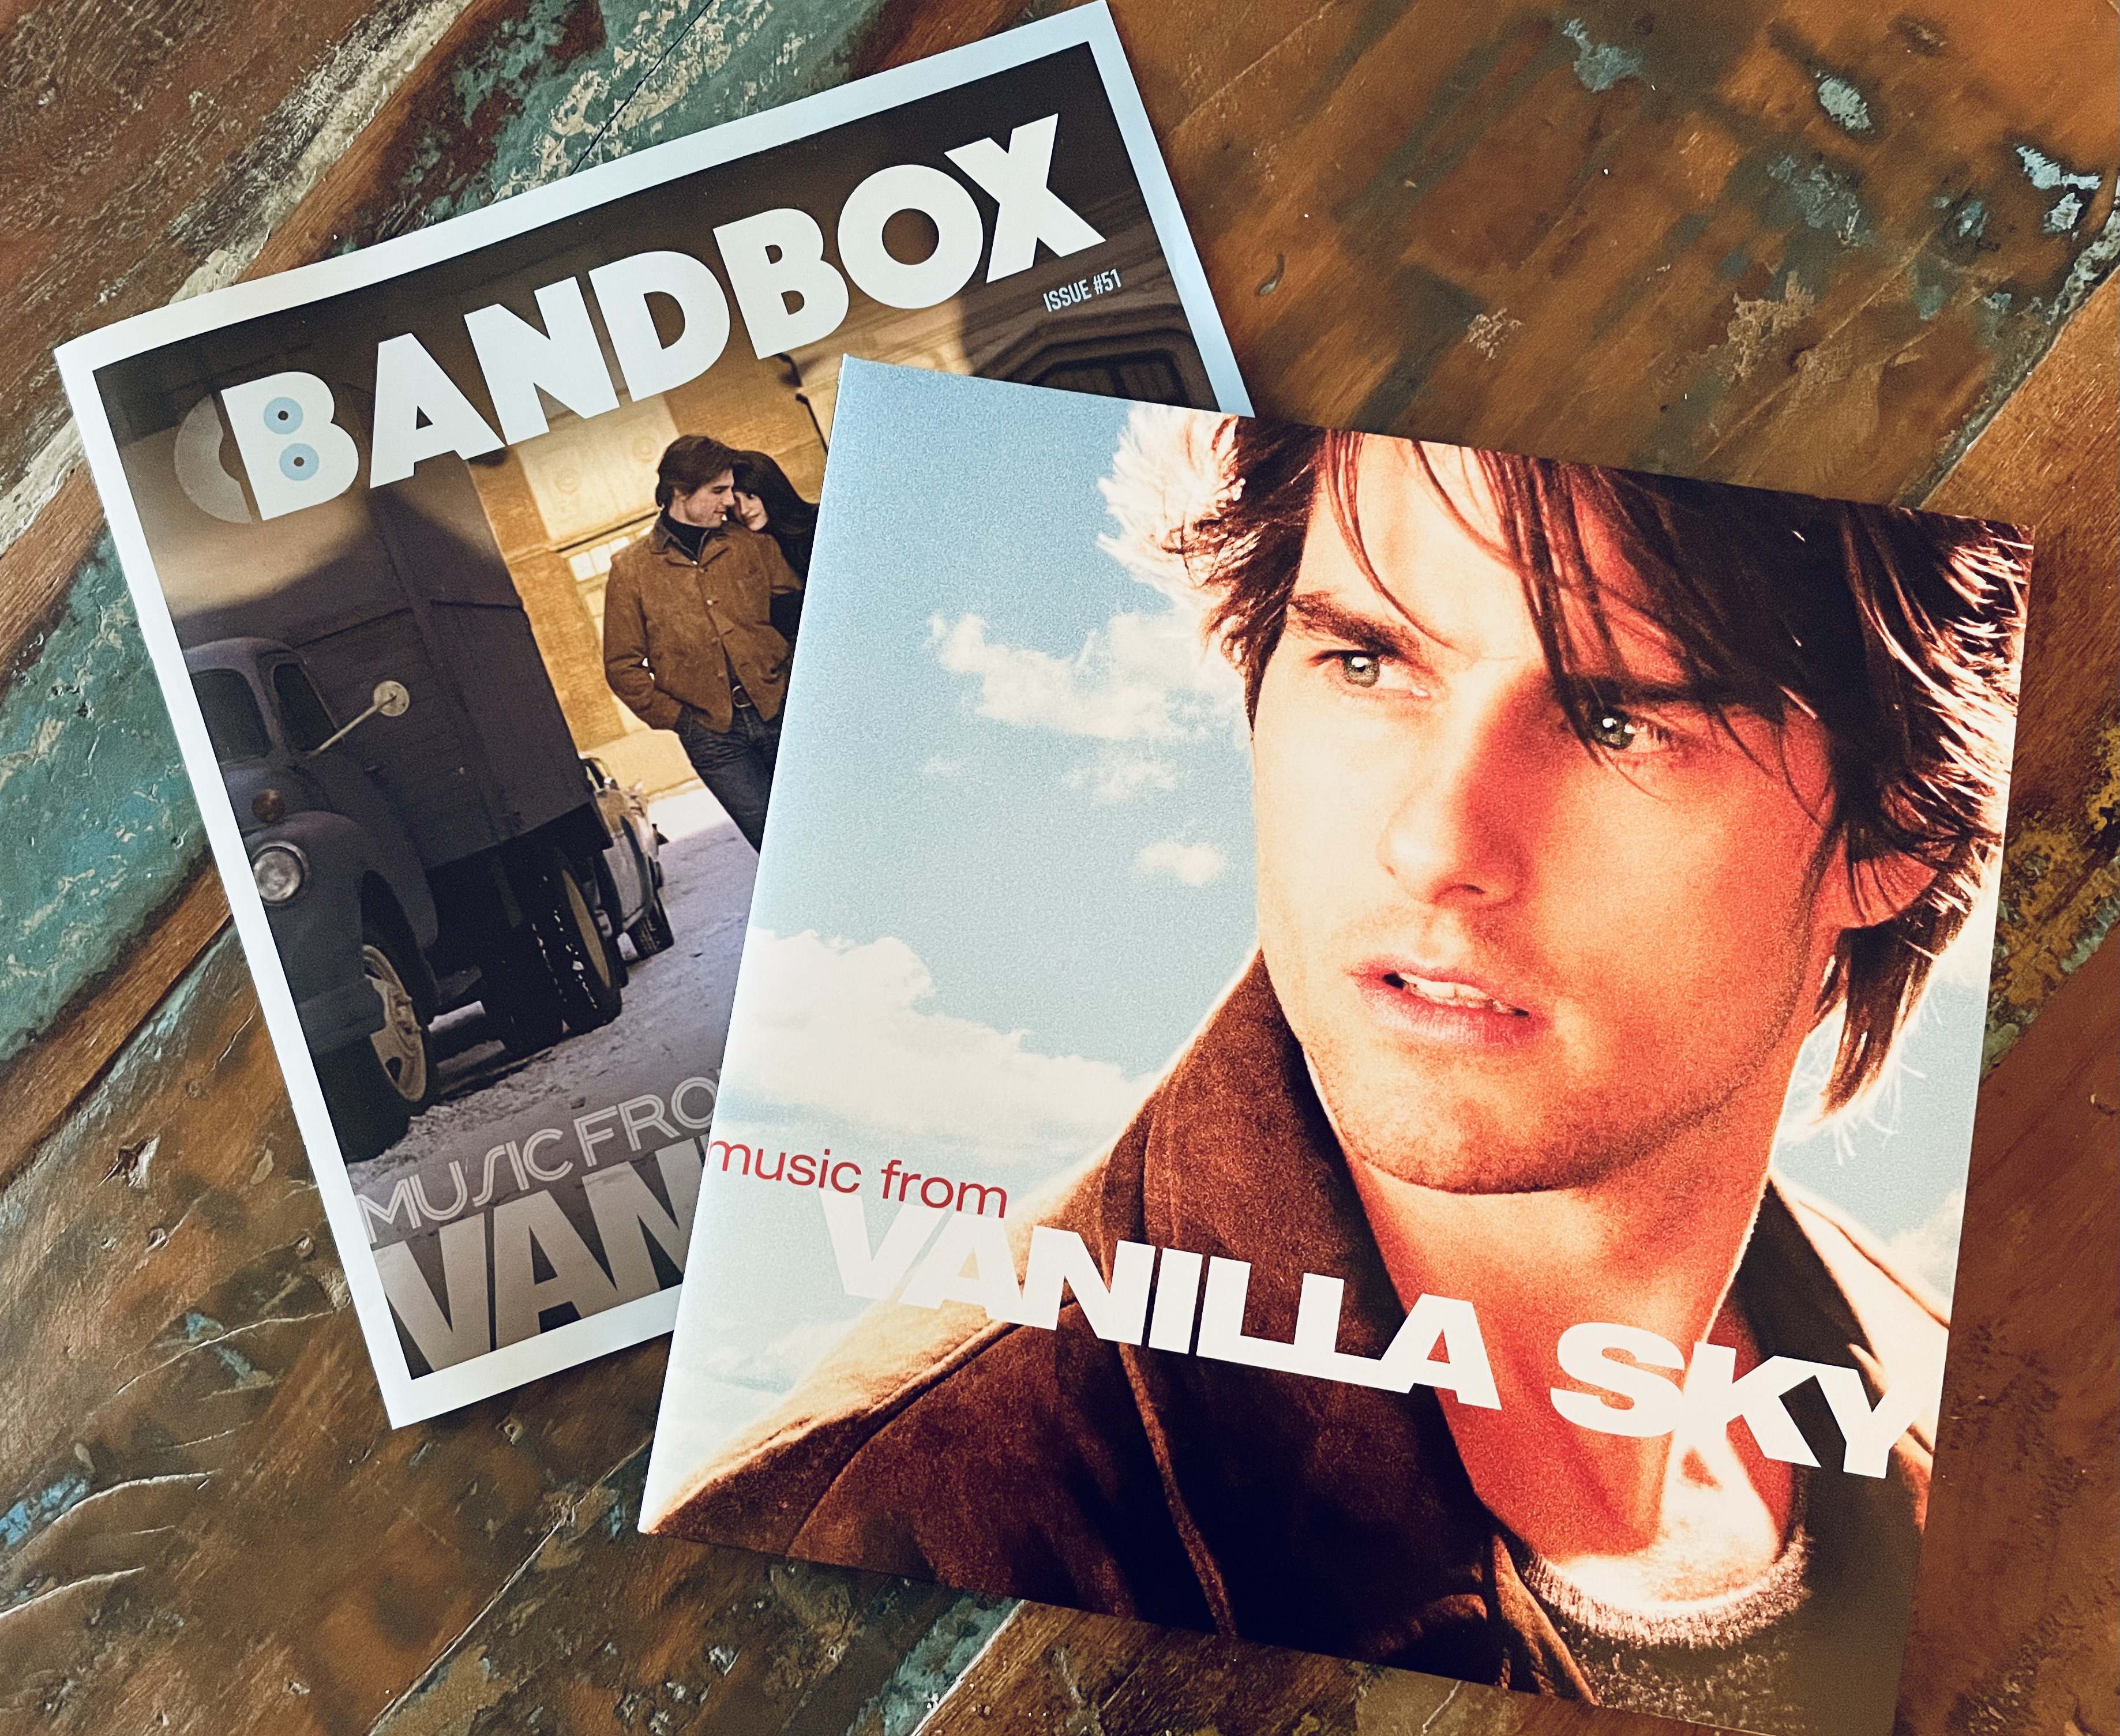 Geek insider, geekinsider, geekinsider. Com,, bandbox unboxed vol. 27 - music from 'vanilla sky', entertainment